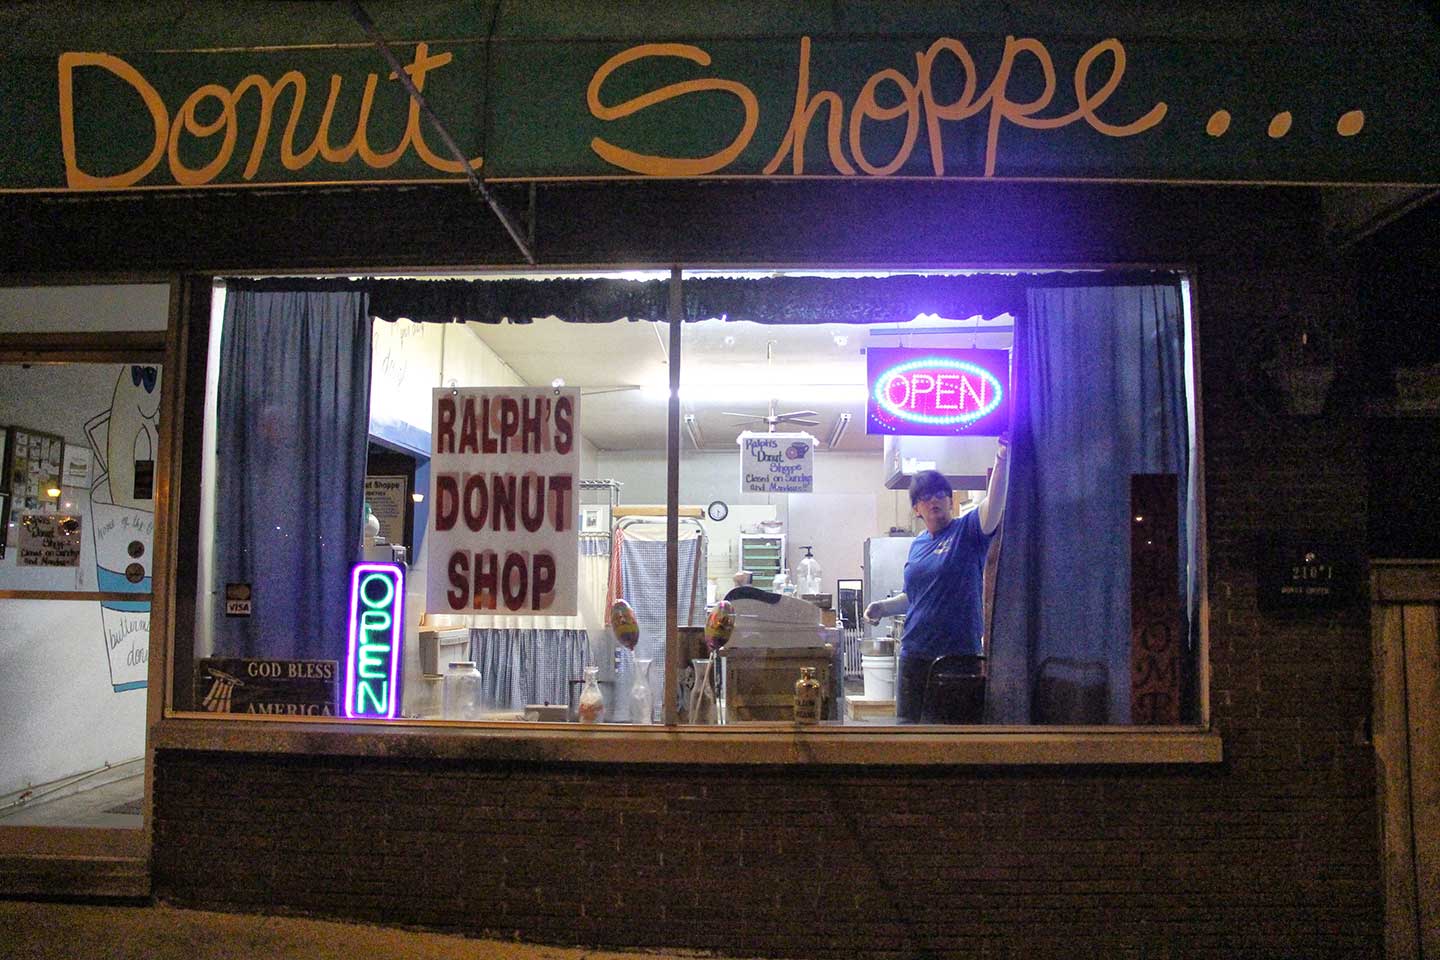 The clock strikes 4:30 a.m. as two student photographers emerge from the morning dusk to greet Tina Baird. Baird has agreed to give her guests the chance to view life through her eyes as she opens her donut shoppe.  photo by Olivia Johnson - 2017